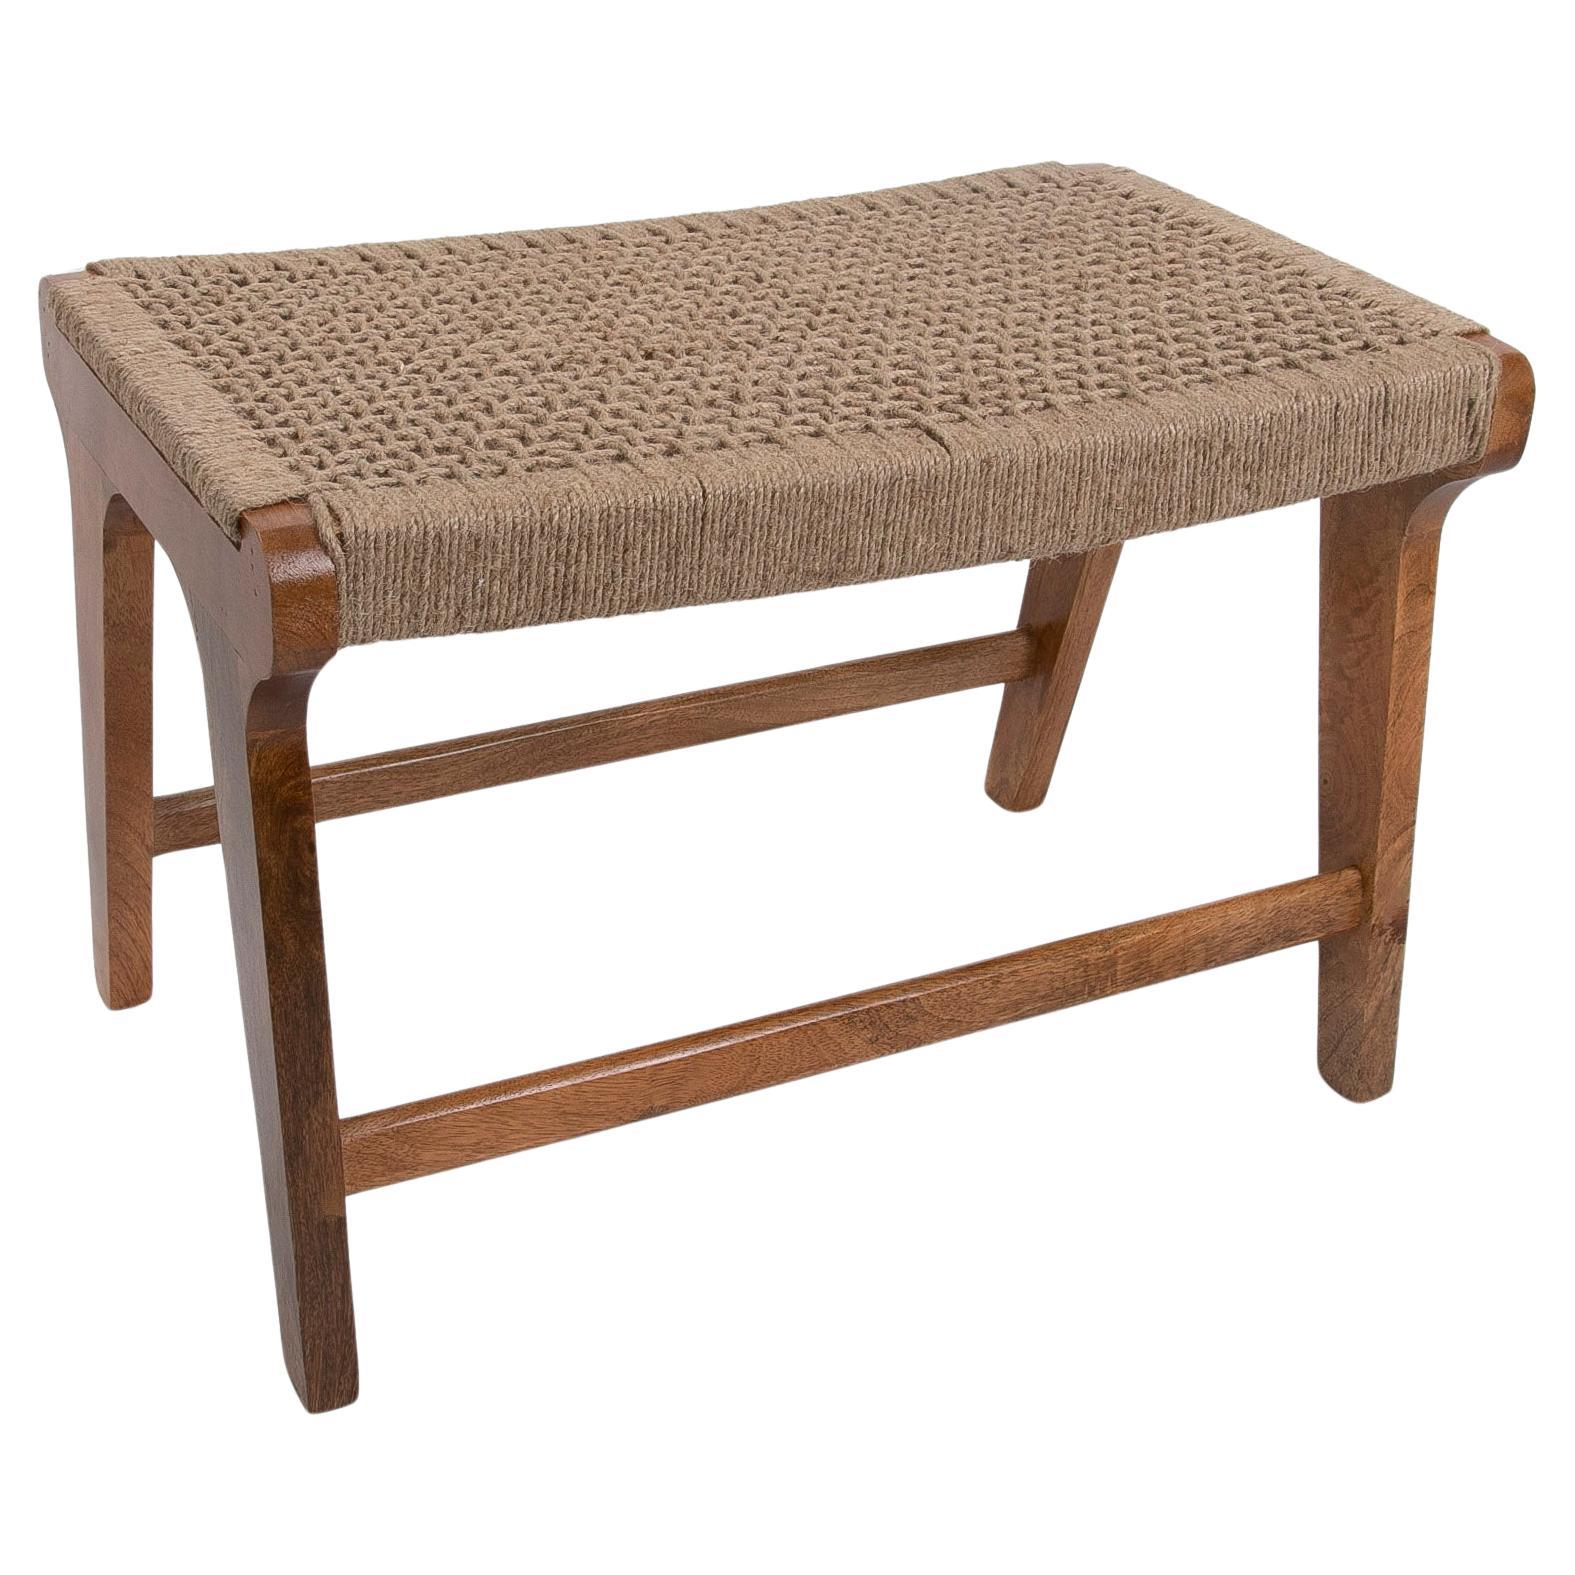 Wooden Stool with Hand-Braided Rope Seat For Sale